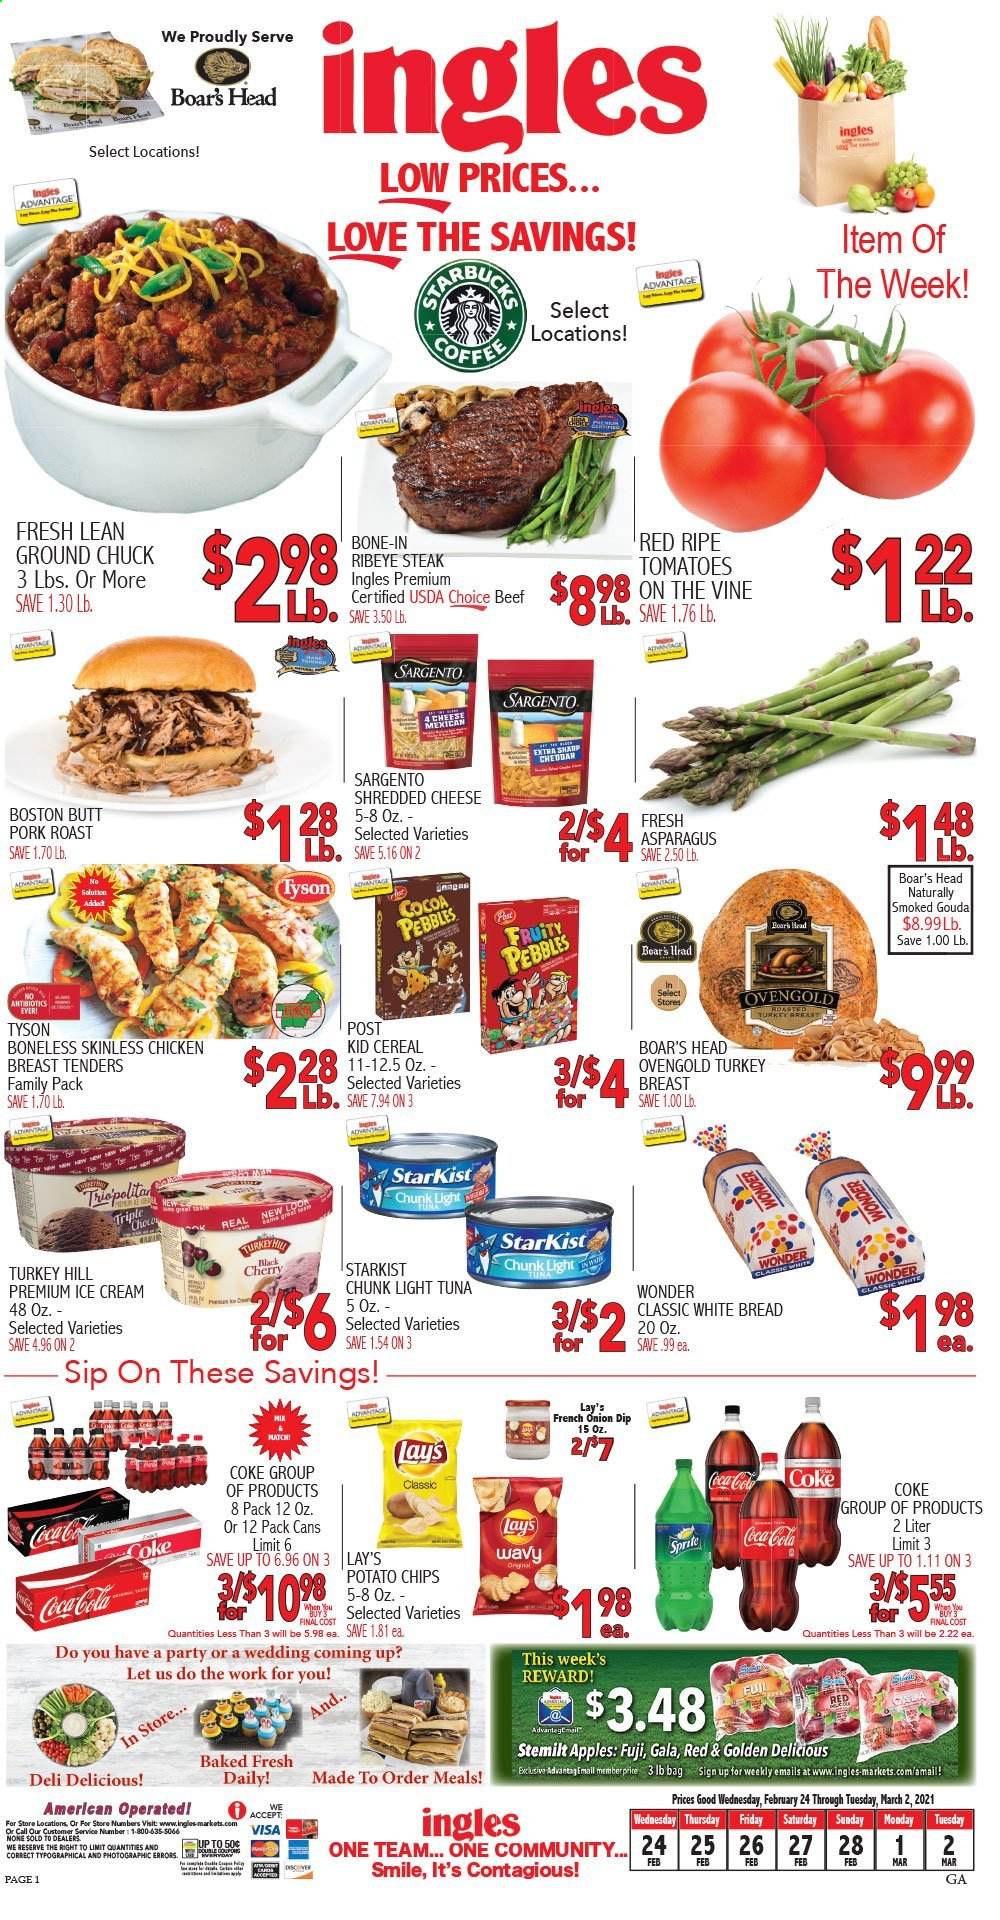 thumbnail - Ingles Flyer - 02/24/2021 - 03/02/2021 - Sales products - Golden Delicious, bread, white bread, apples, tuna, StarKist, gouda, shredded cheese, cheddar, Sargento, dip, ice cream, potato chips, chips, Lay’s, cocoa, light tuna, cereals, Fruity Pebbles, Coca-Cola, coffee, turkey breast, chicken breasts, beef meat, beef steak, ground chuck, steak, bone-in ribeye, ribeye steak, pork meat, pork roast. Page 1.